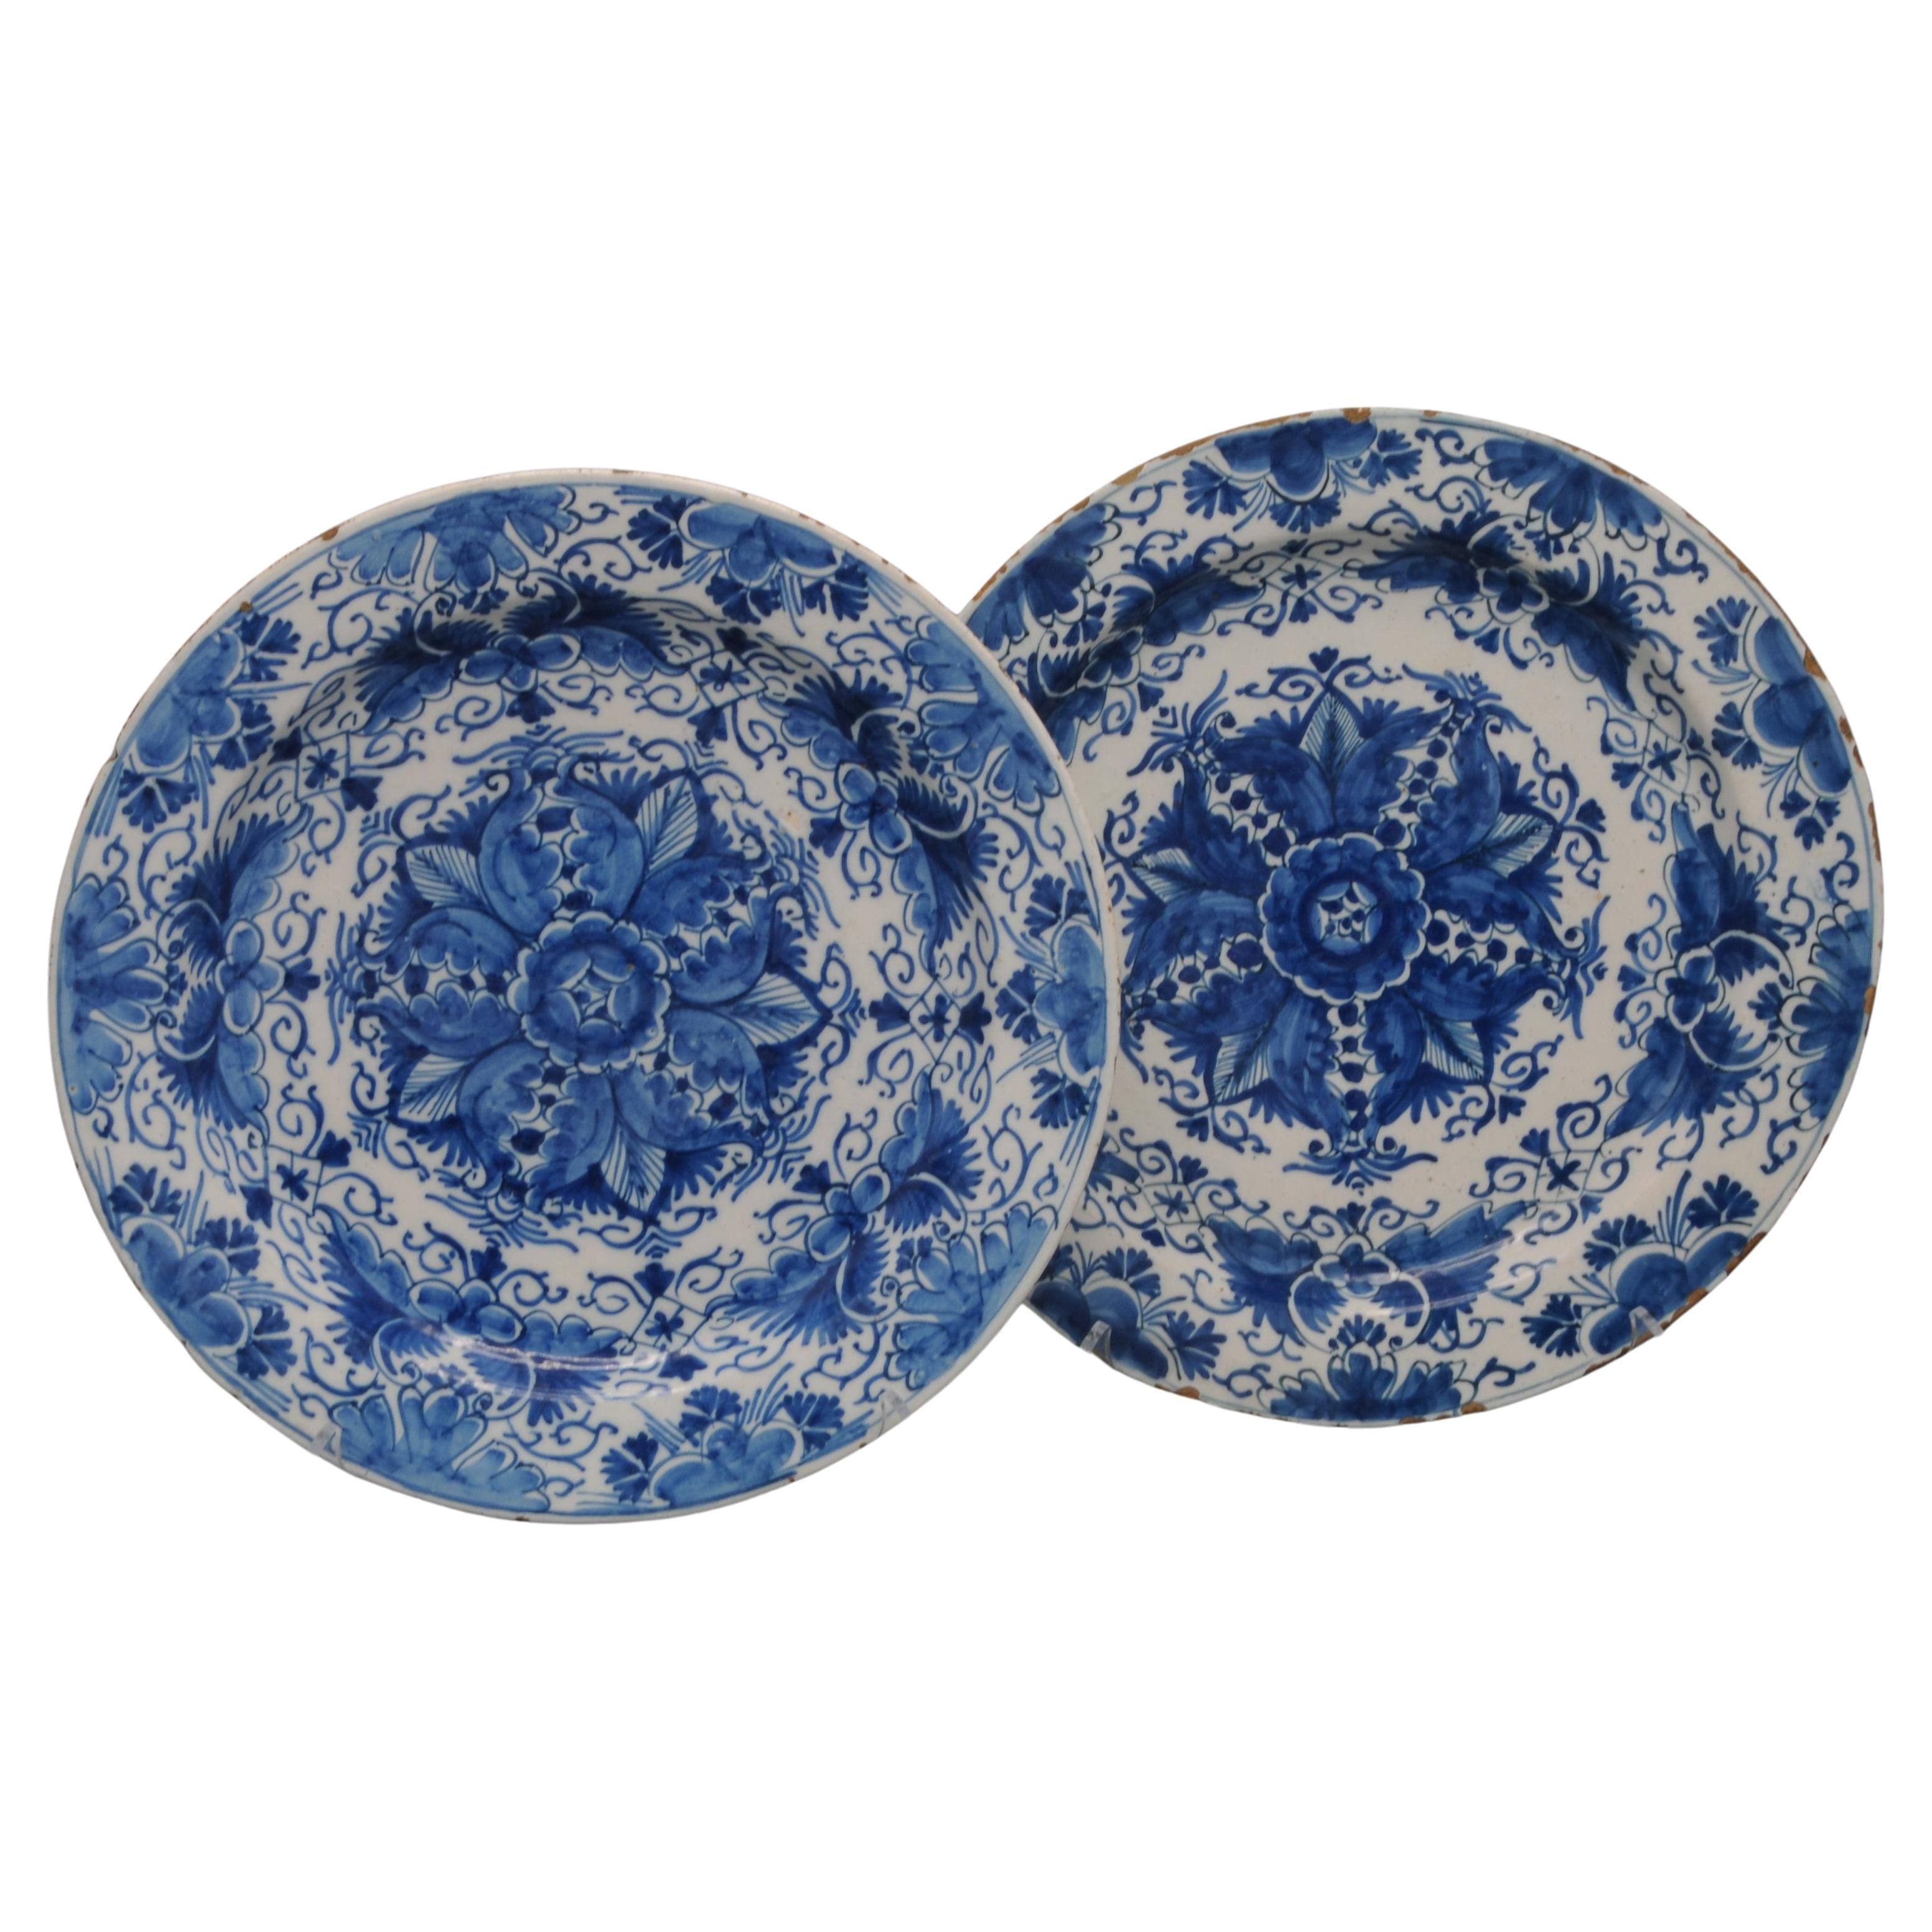 Delft - Pair of dishes - 18th century  For Sale